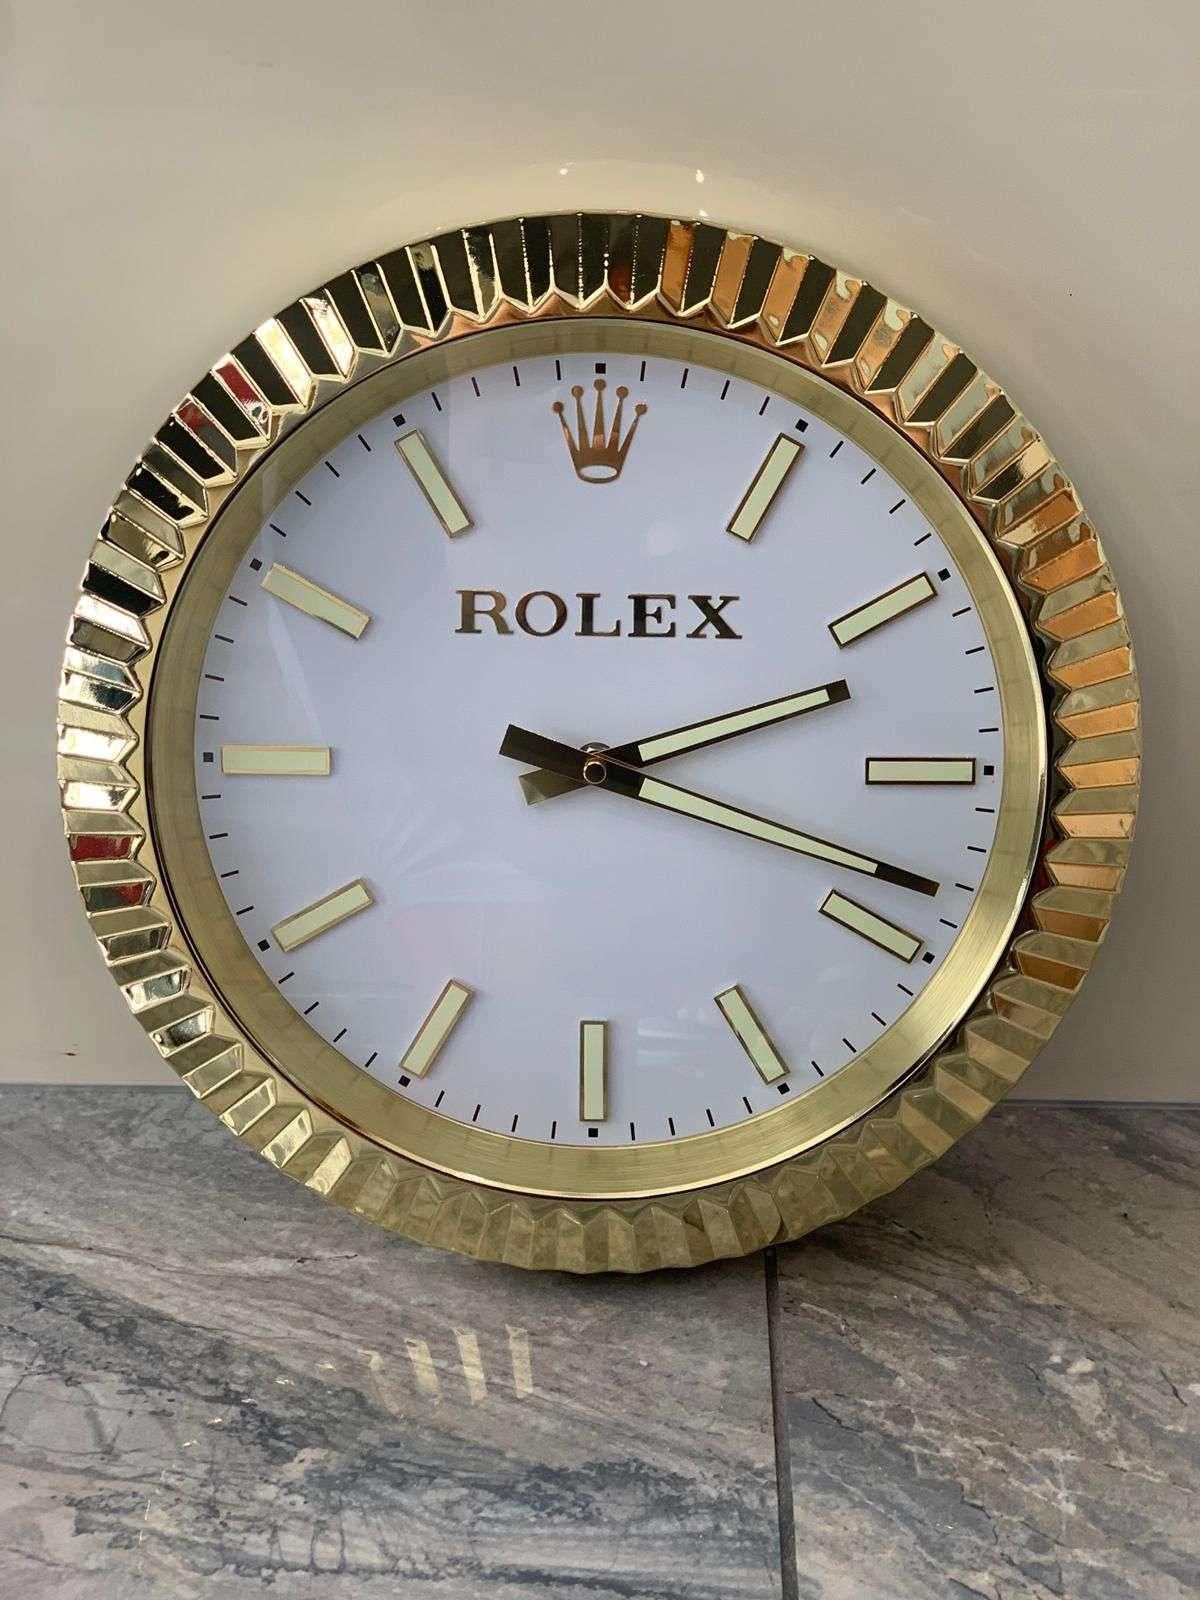 ROLEX Officially Certified Datejust Gold Wall Clock 
Good condition, working.
Free international shipping.